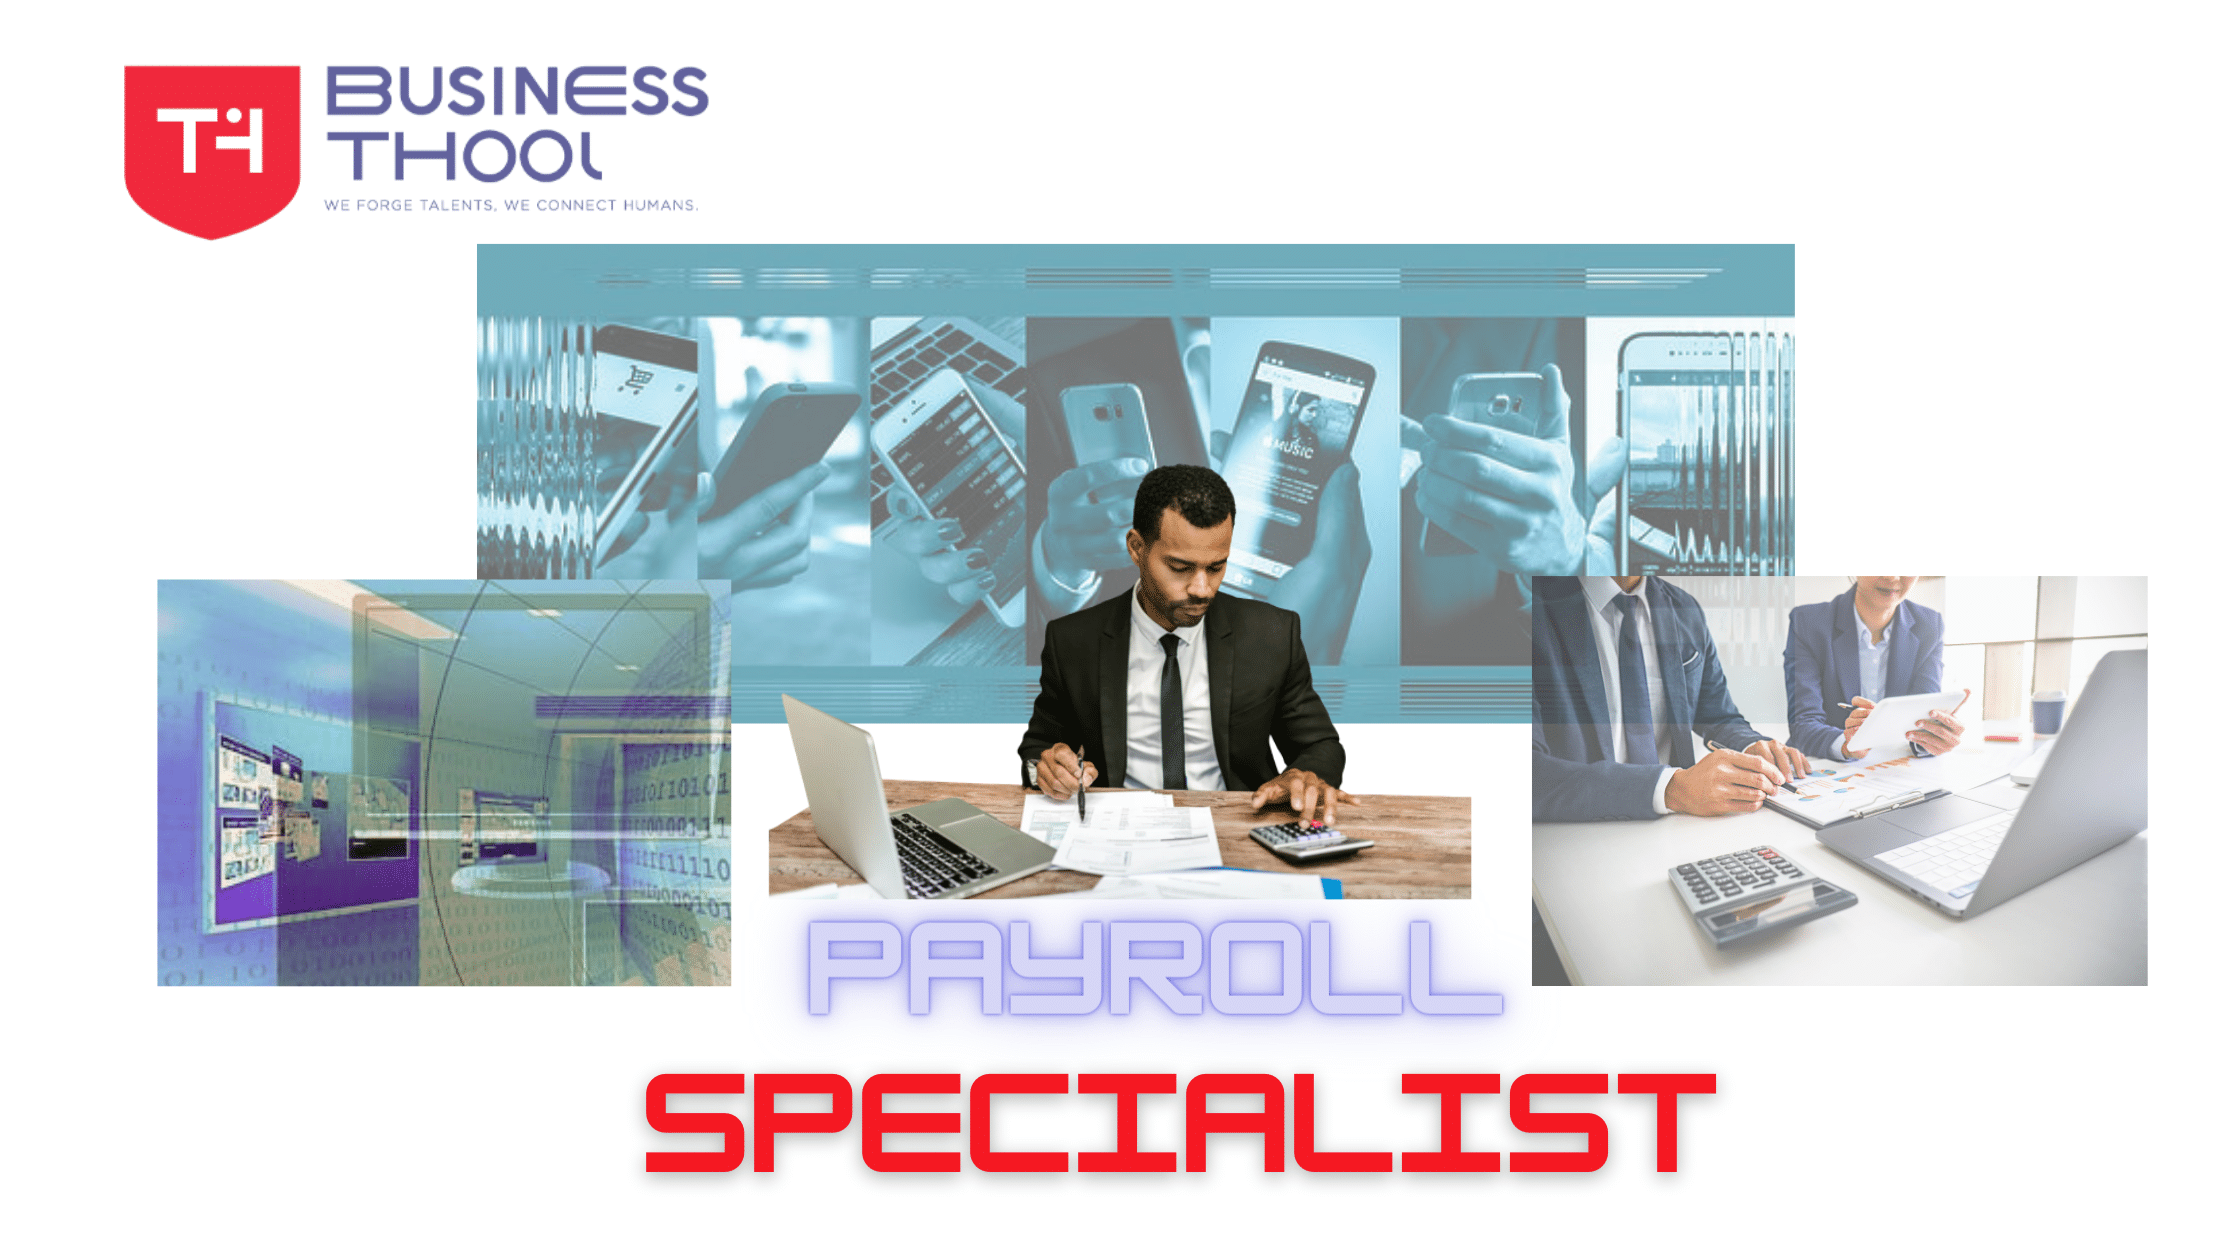 payroll specialist blog Business Thool